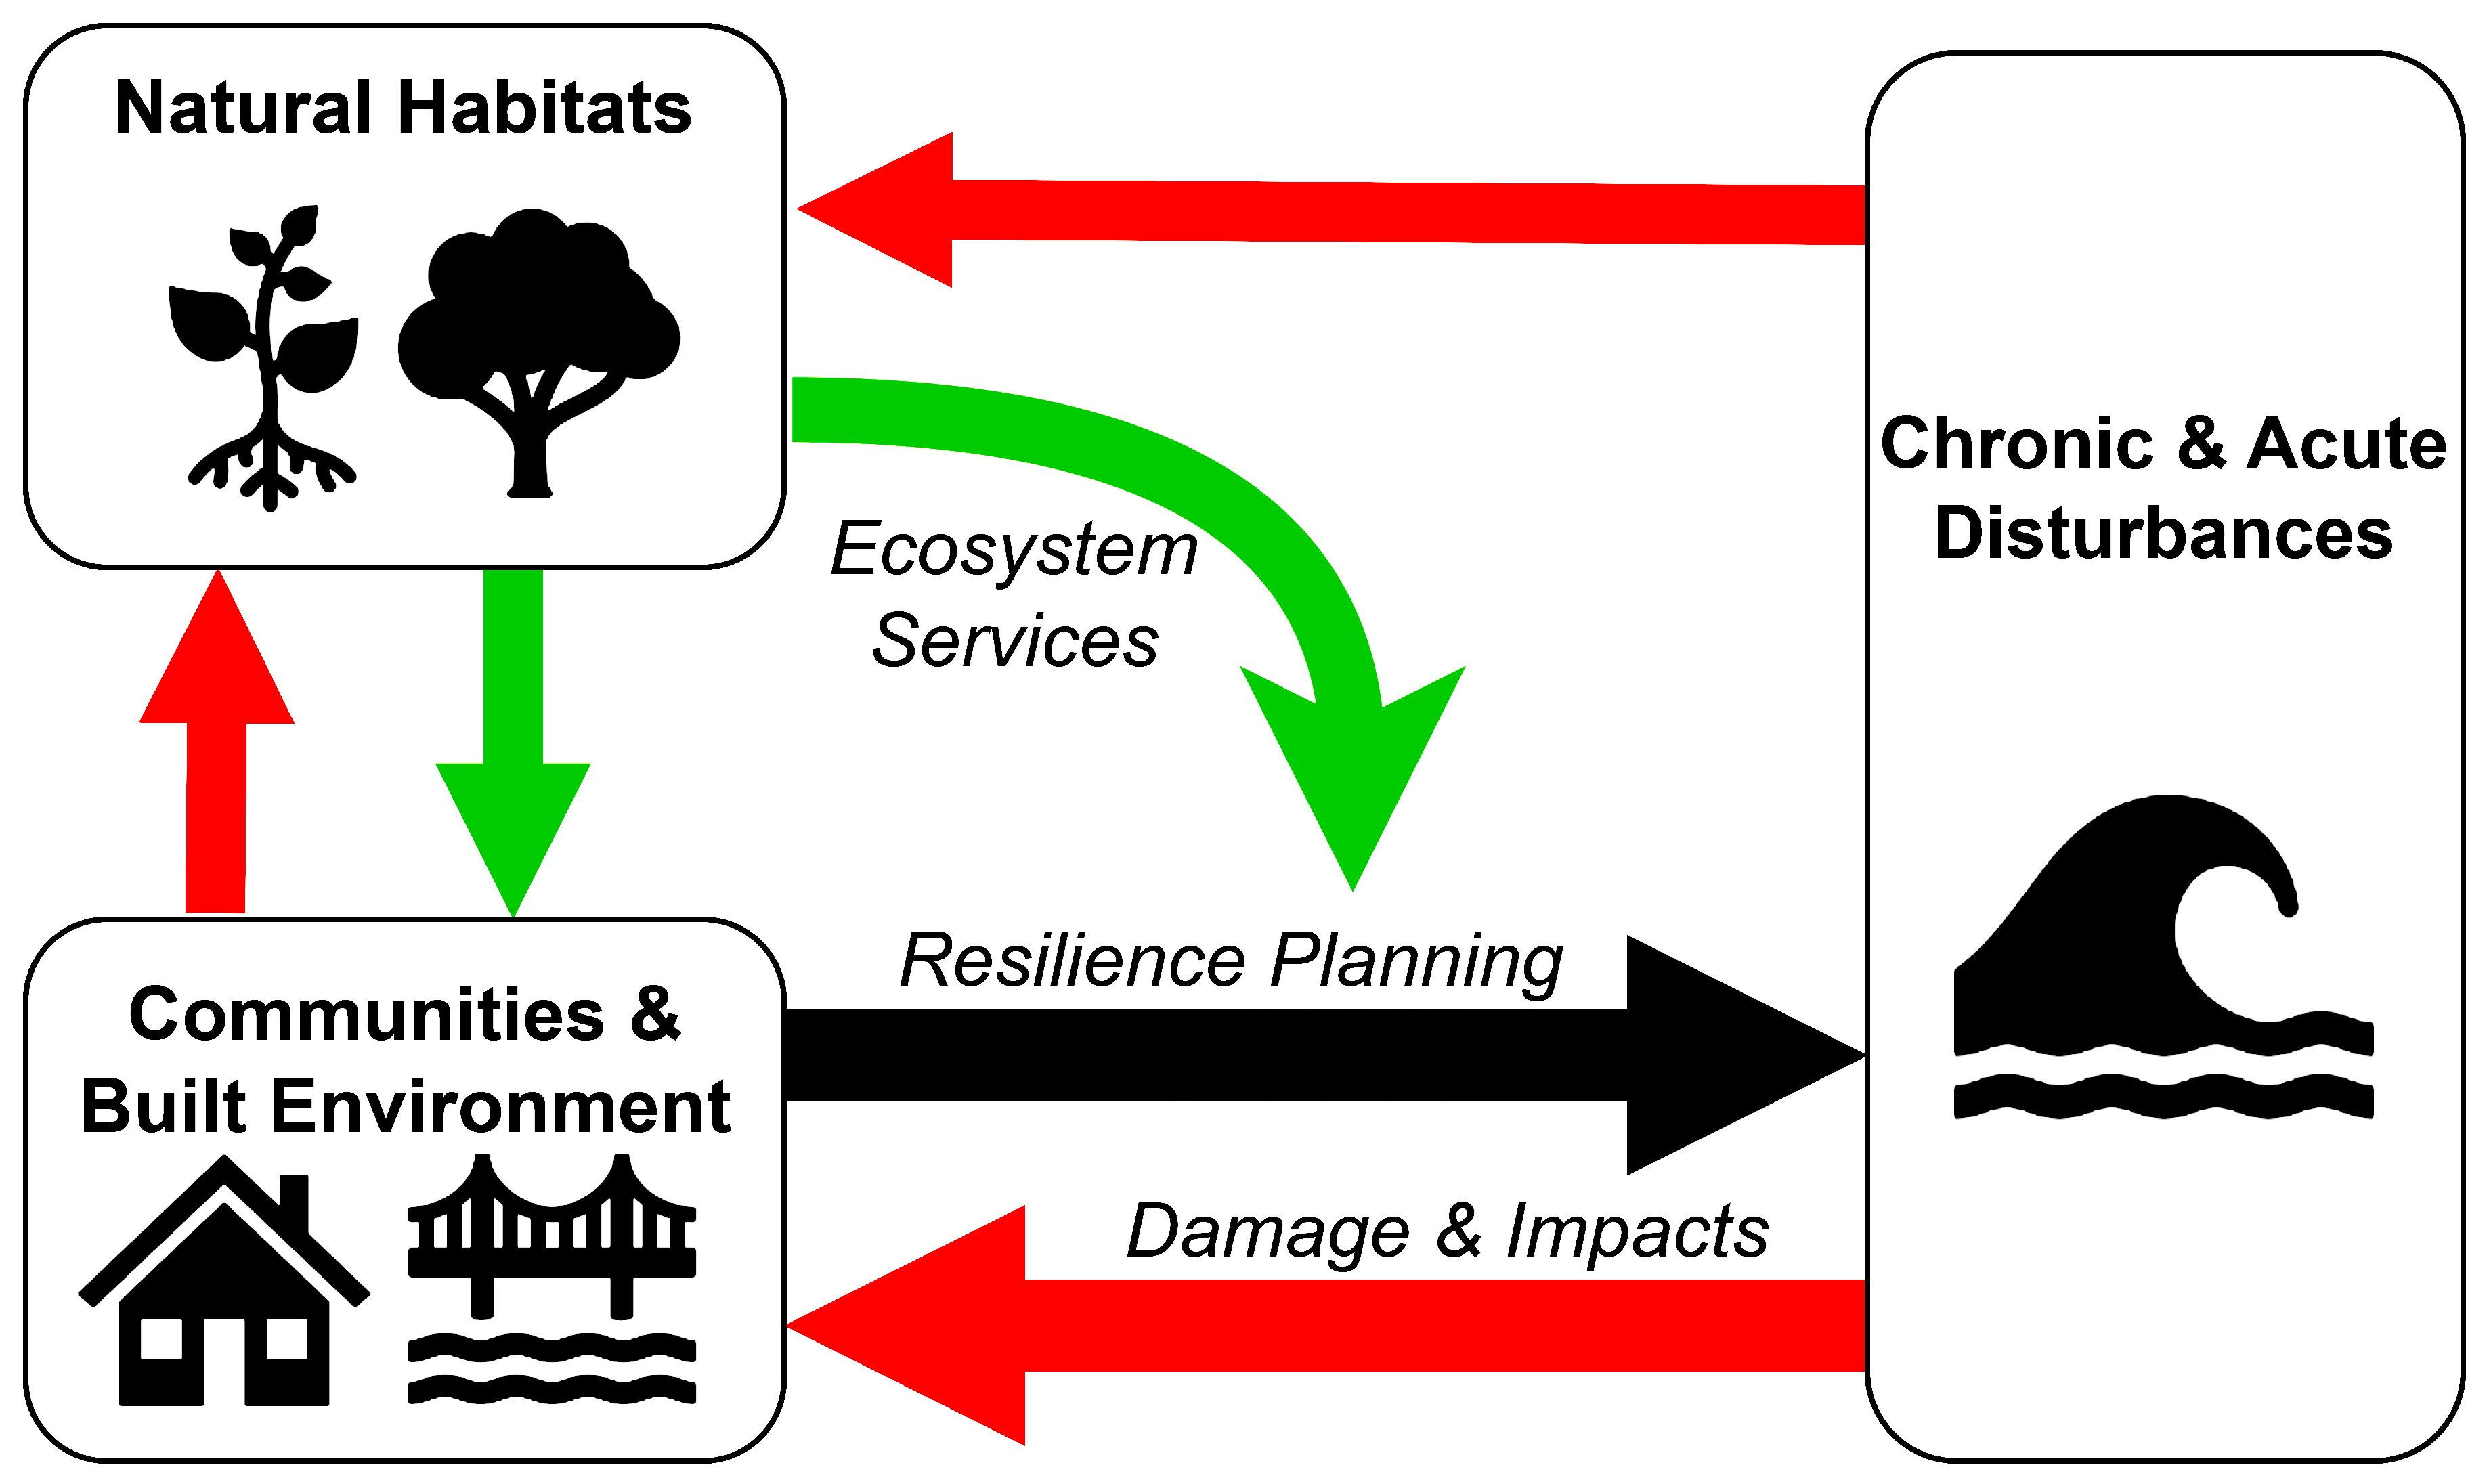 image: a graphic with arrows showing how stormwater impacts communities, natural habitats, ecosystem services.